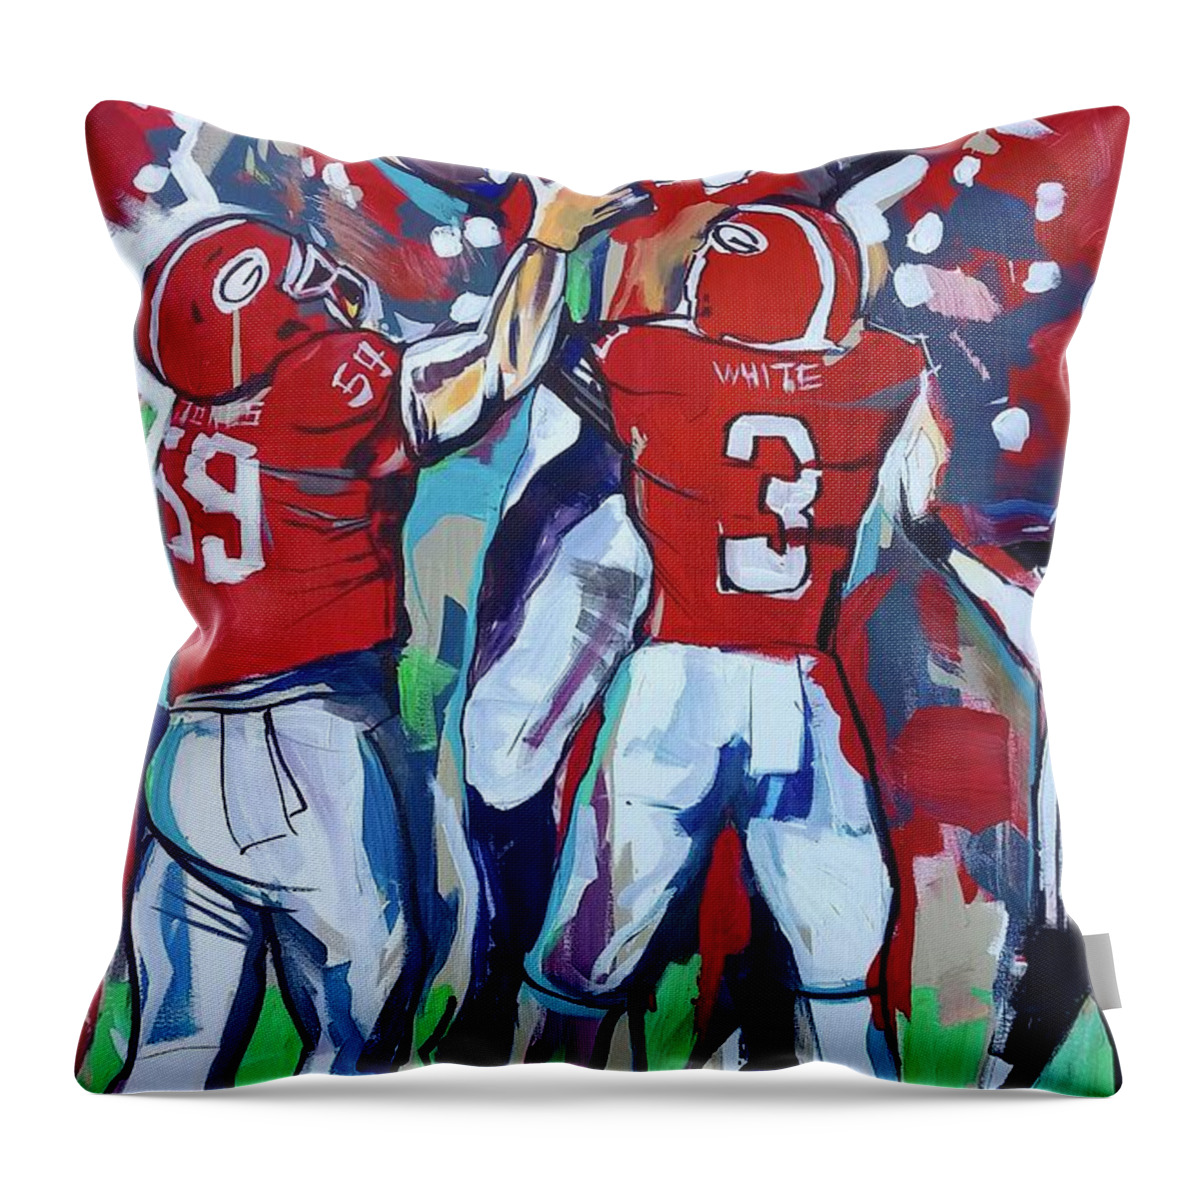 Strong Victory Throw Pillow featuring the painting Strong VIctory by John Gholson